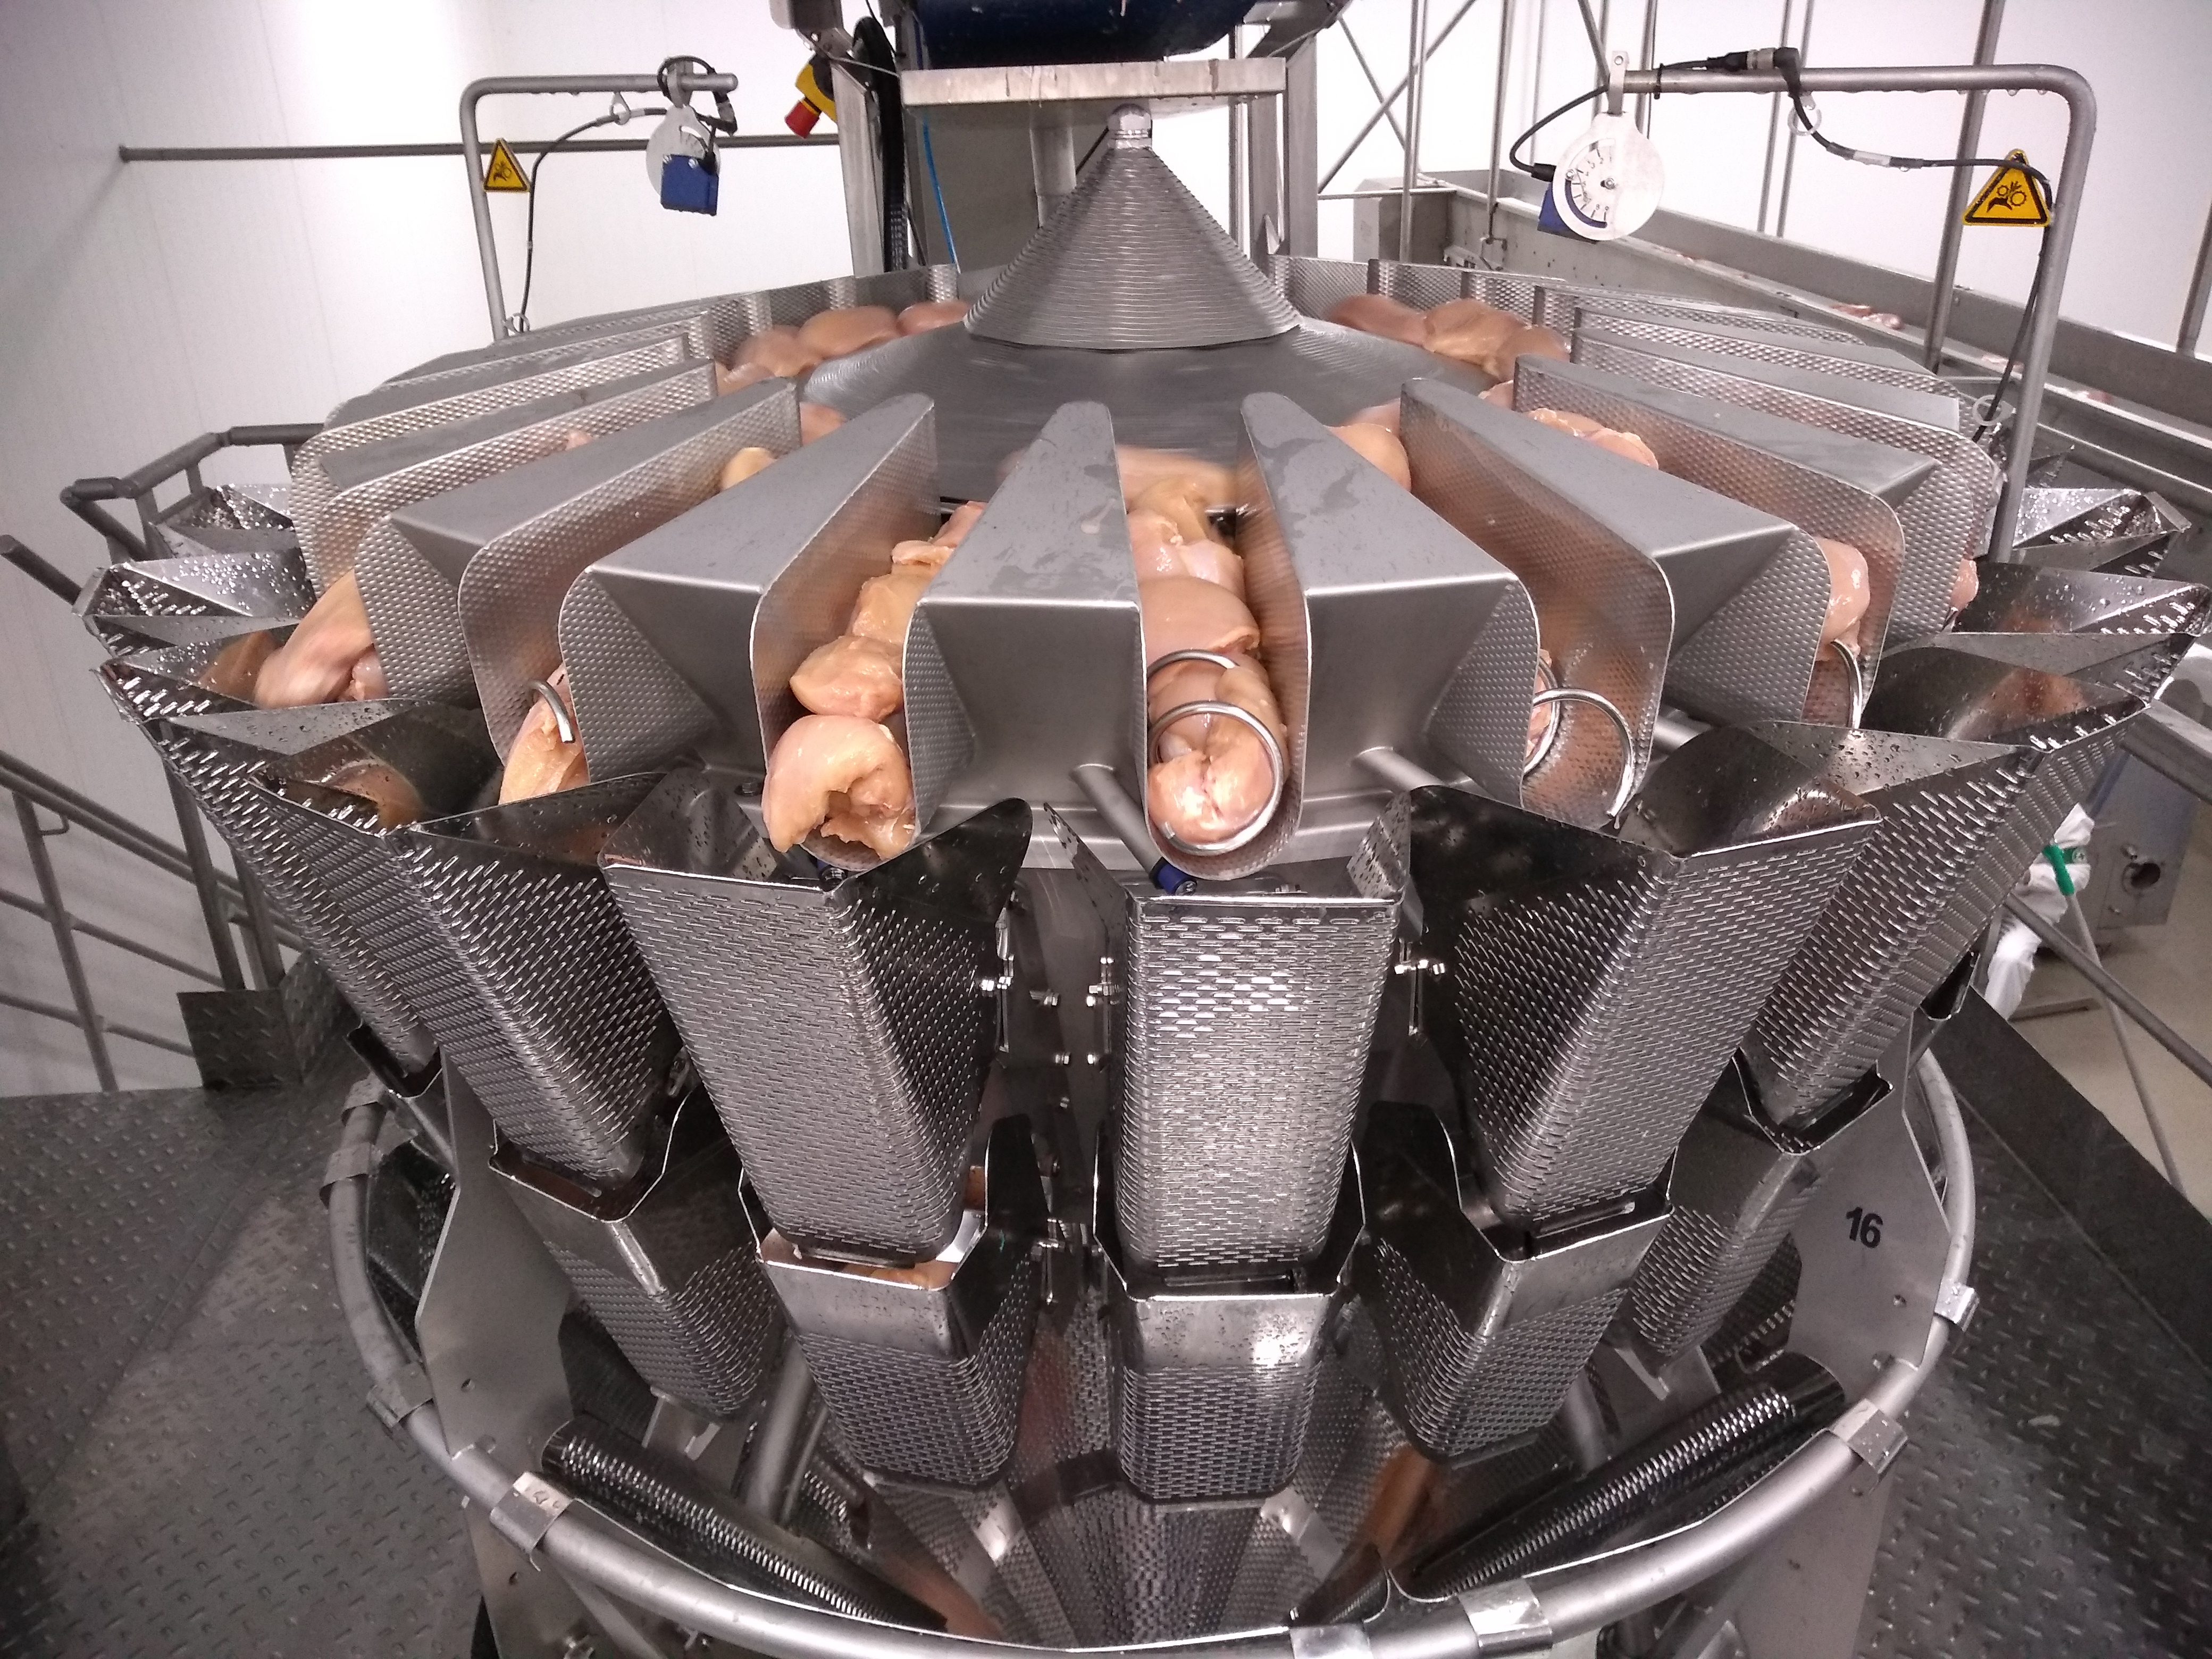 Multihead Weighers